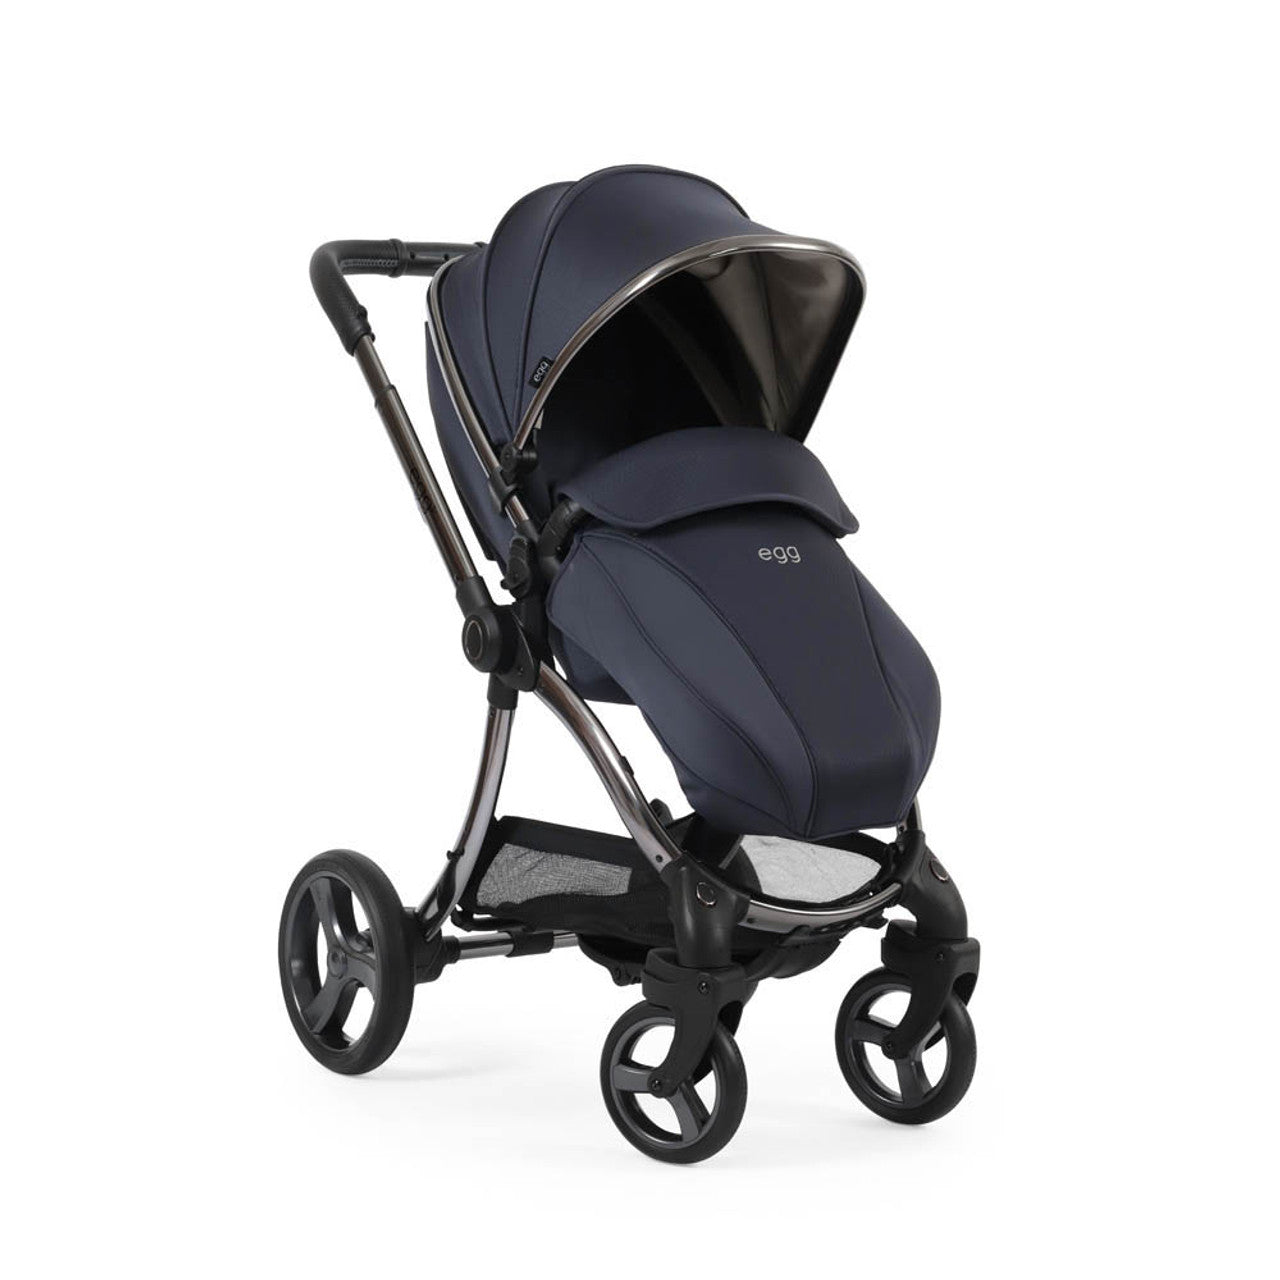 Egg® 3 Pushchair + Carrycot 2 in 1 Pram - Celestial -  | For Your Little One